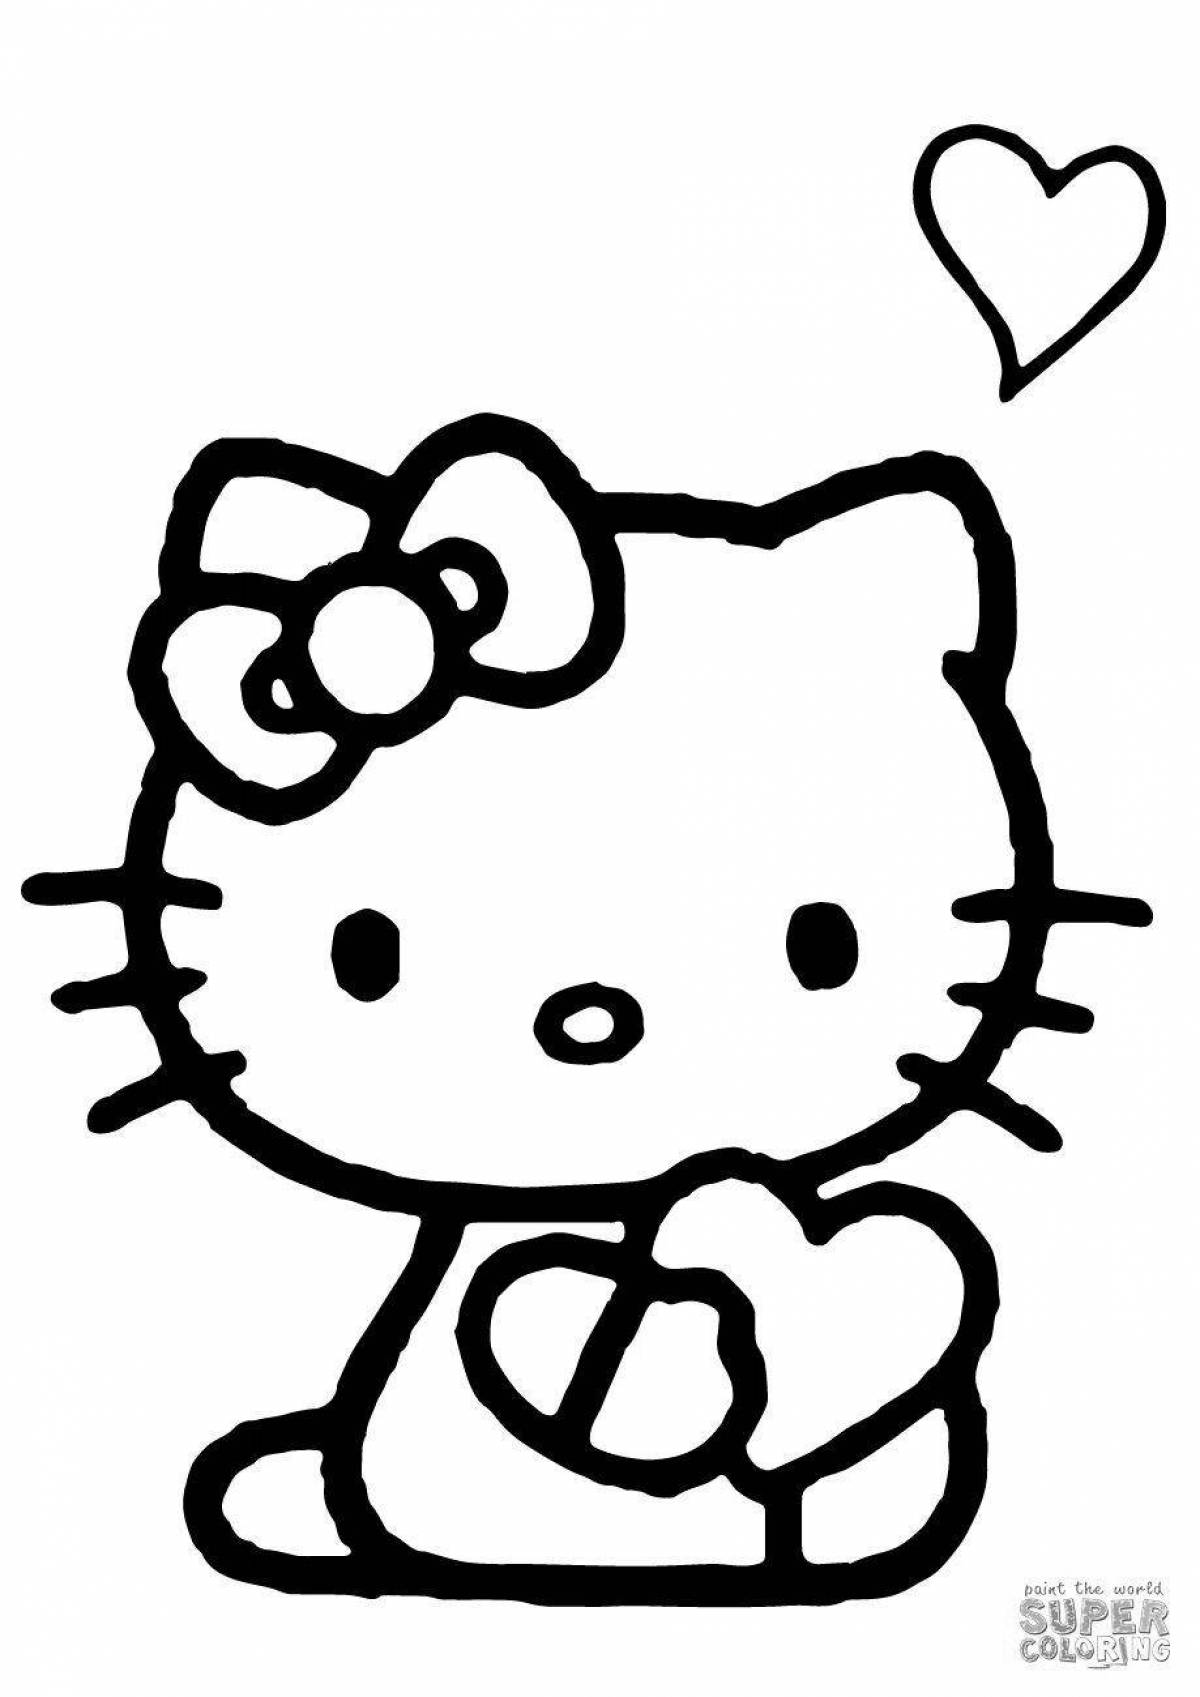 Incredible hello kitty coloring book with heart